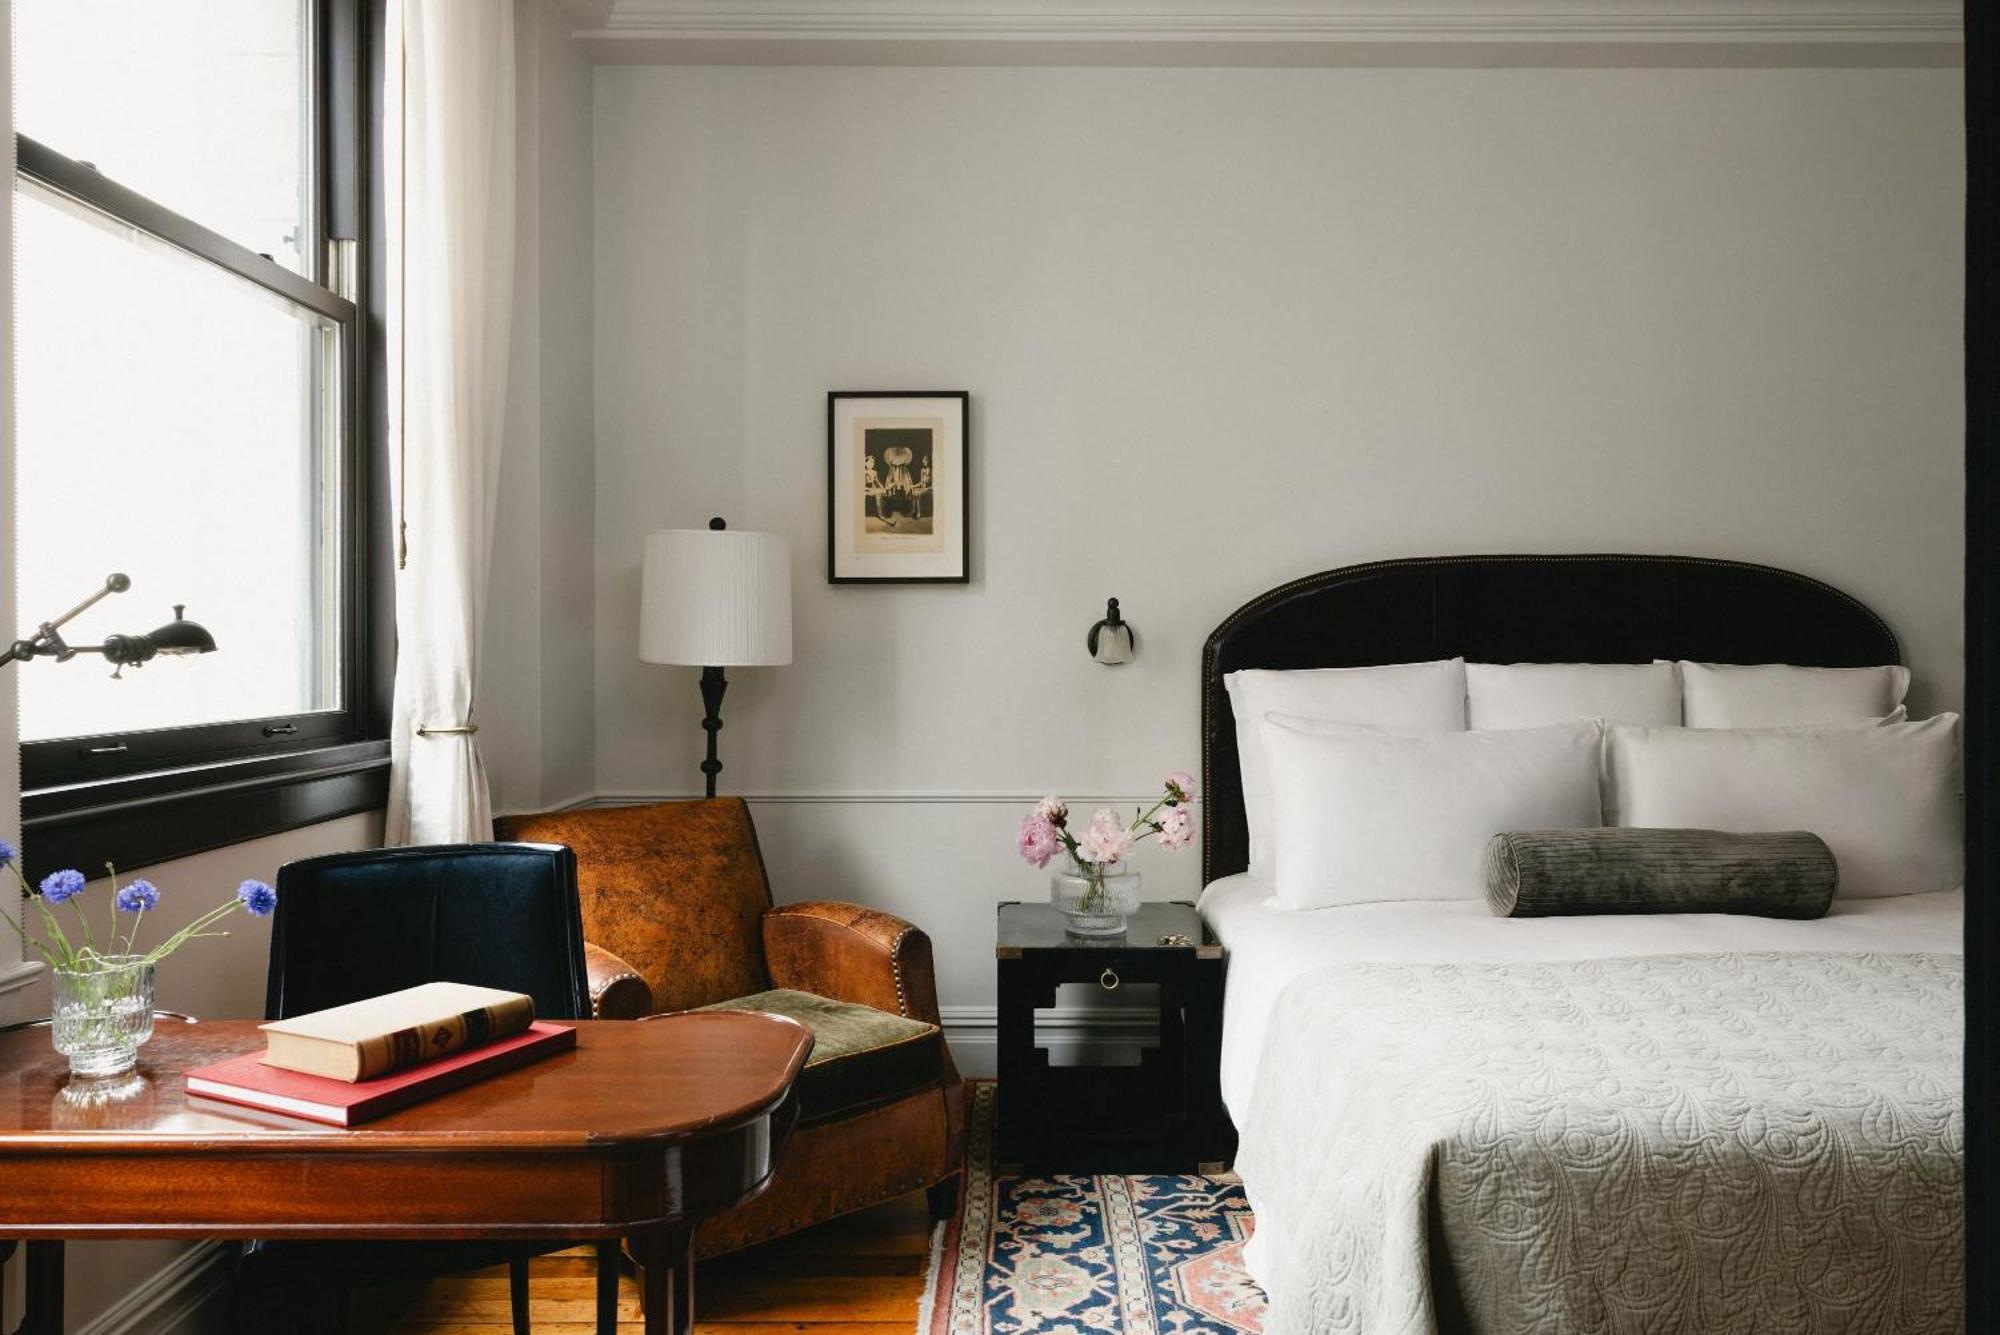 The Ned Nomad Hotel New York Exterior photo